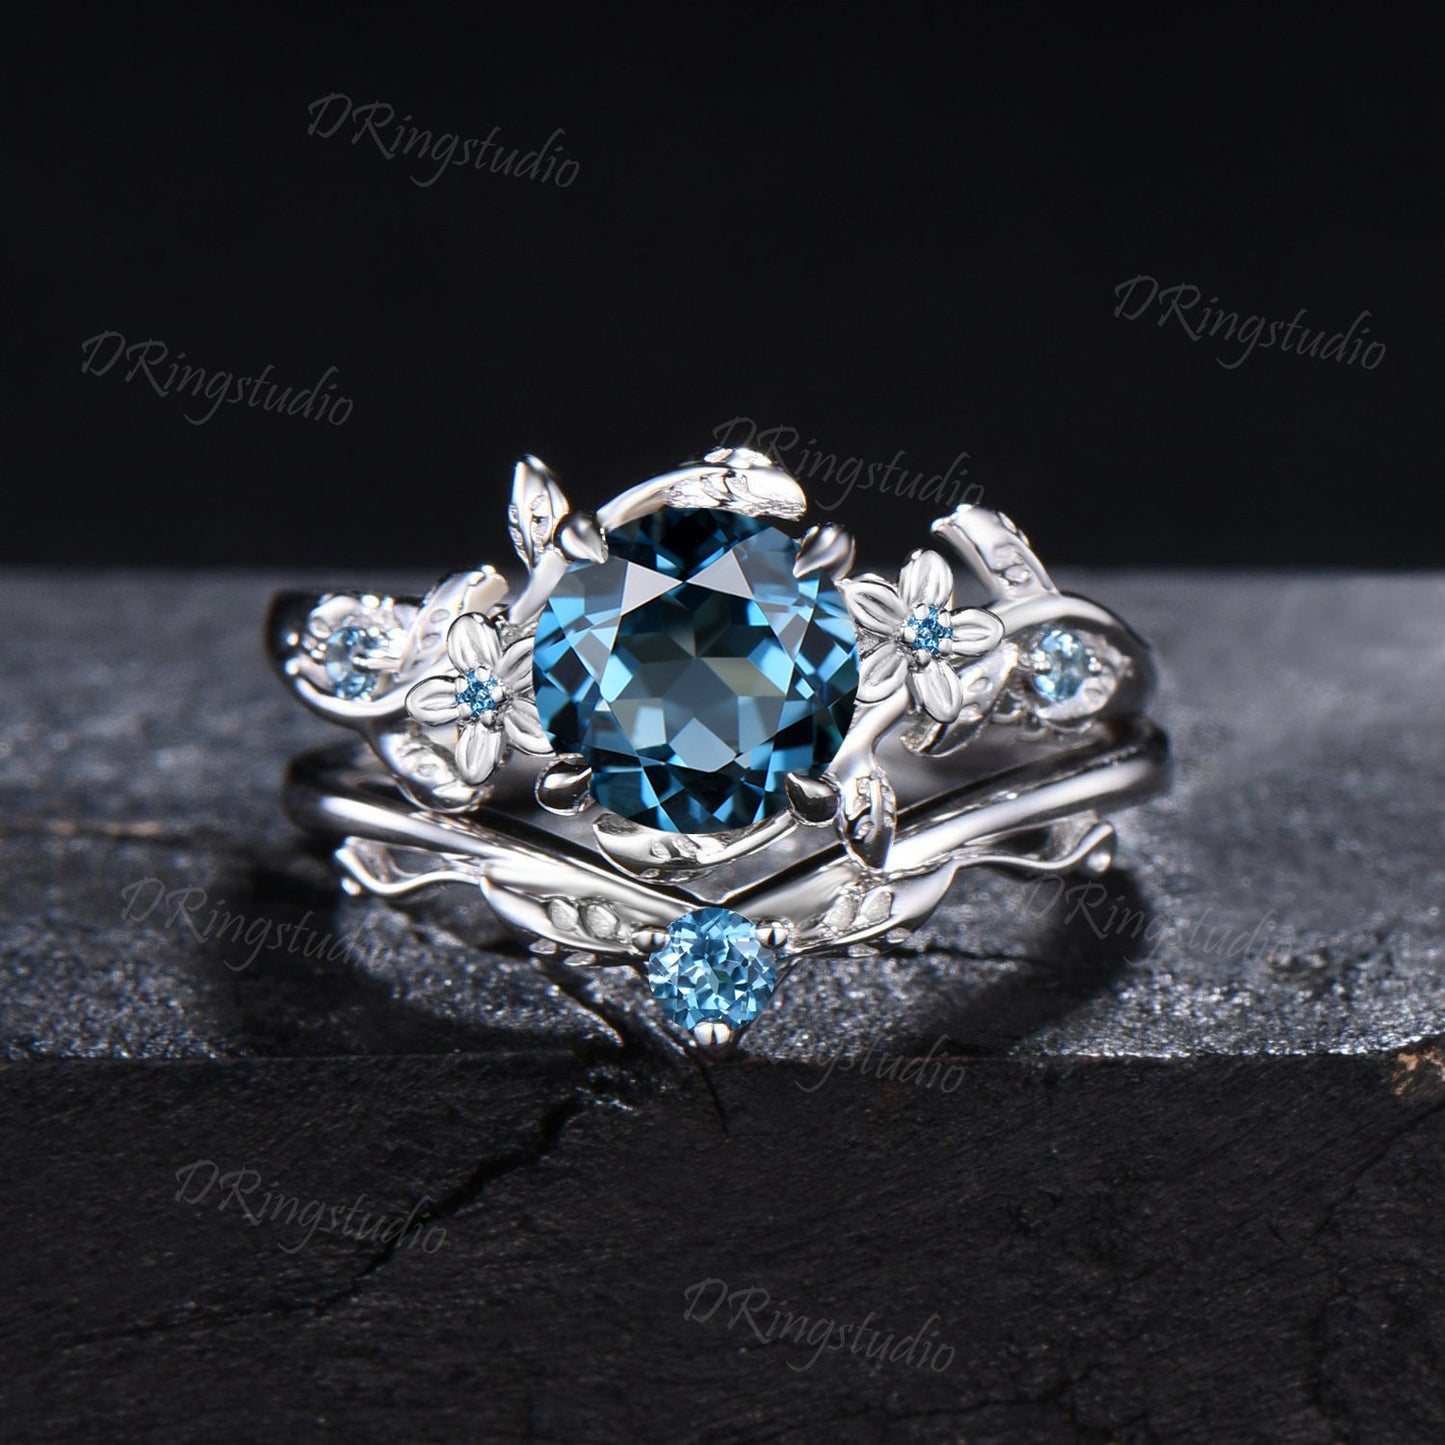 1ct Round Cut Nature Inspired Flower London Blue Topaz Wedding Ring Sterling Silver Topaz Bridal Ring Unique Anniversary/Promise Ring Gifts